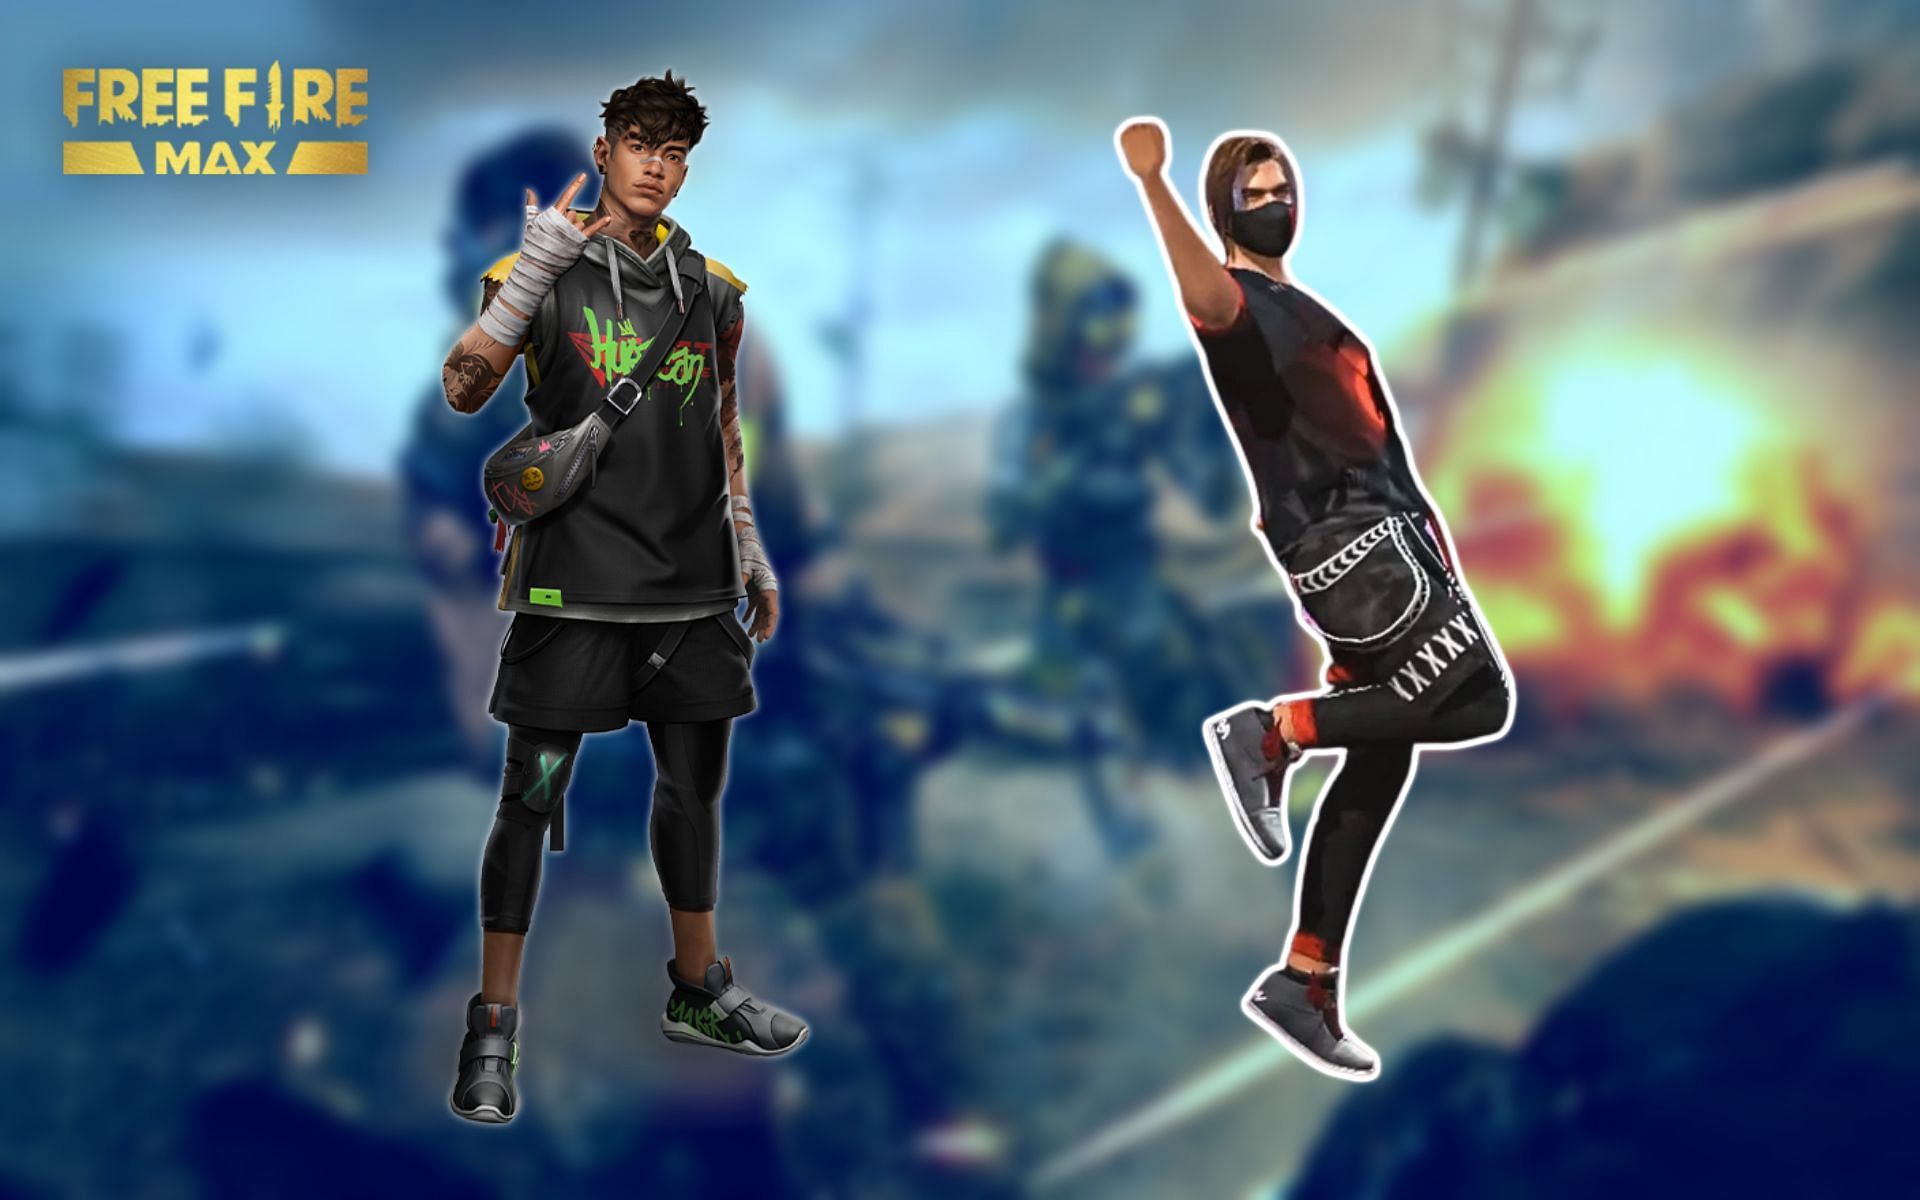 Characters and emotes can be obtained through the redeem codes in Free Fire MAX (Image via Sportskeeda)